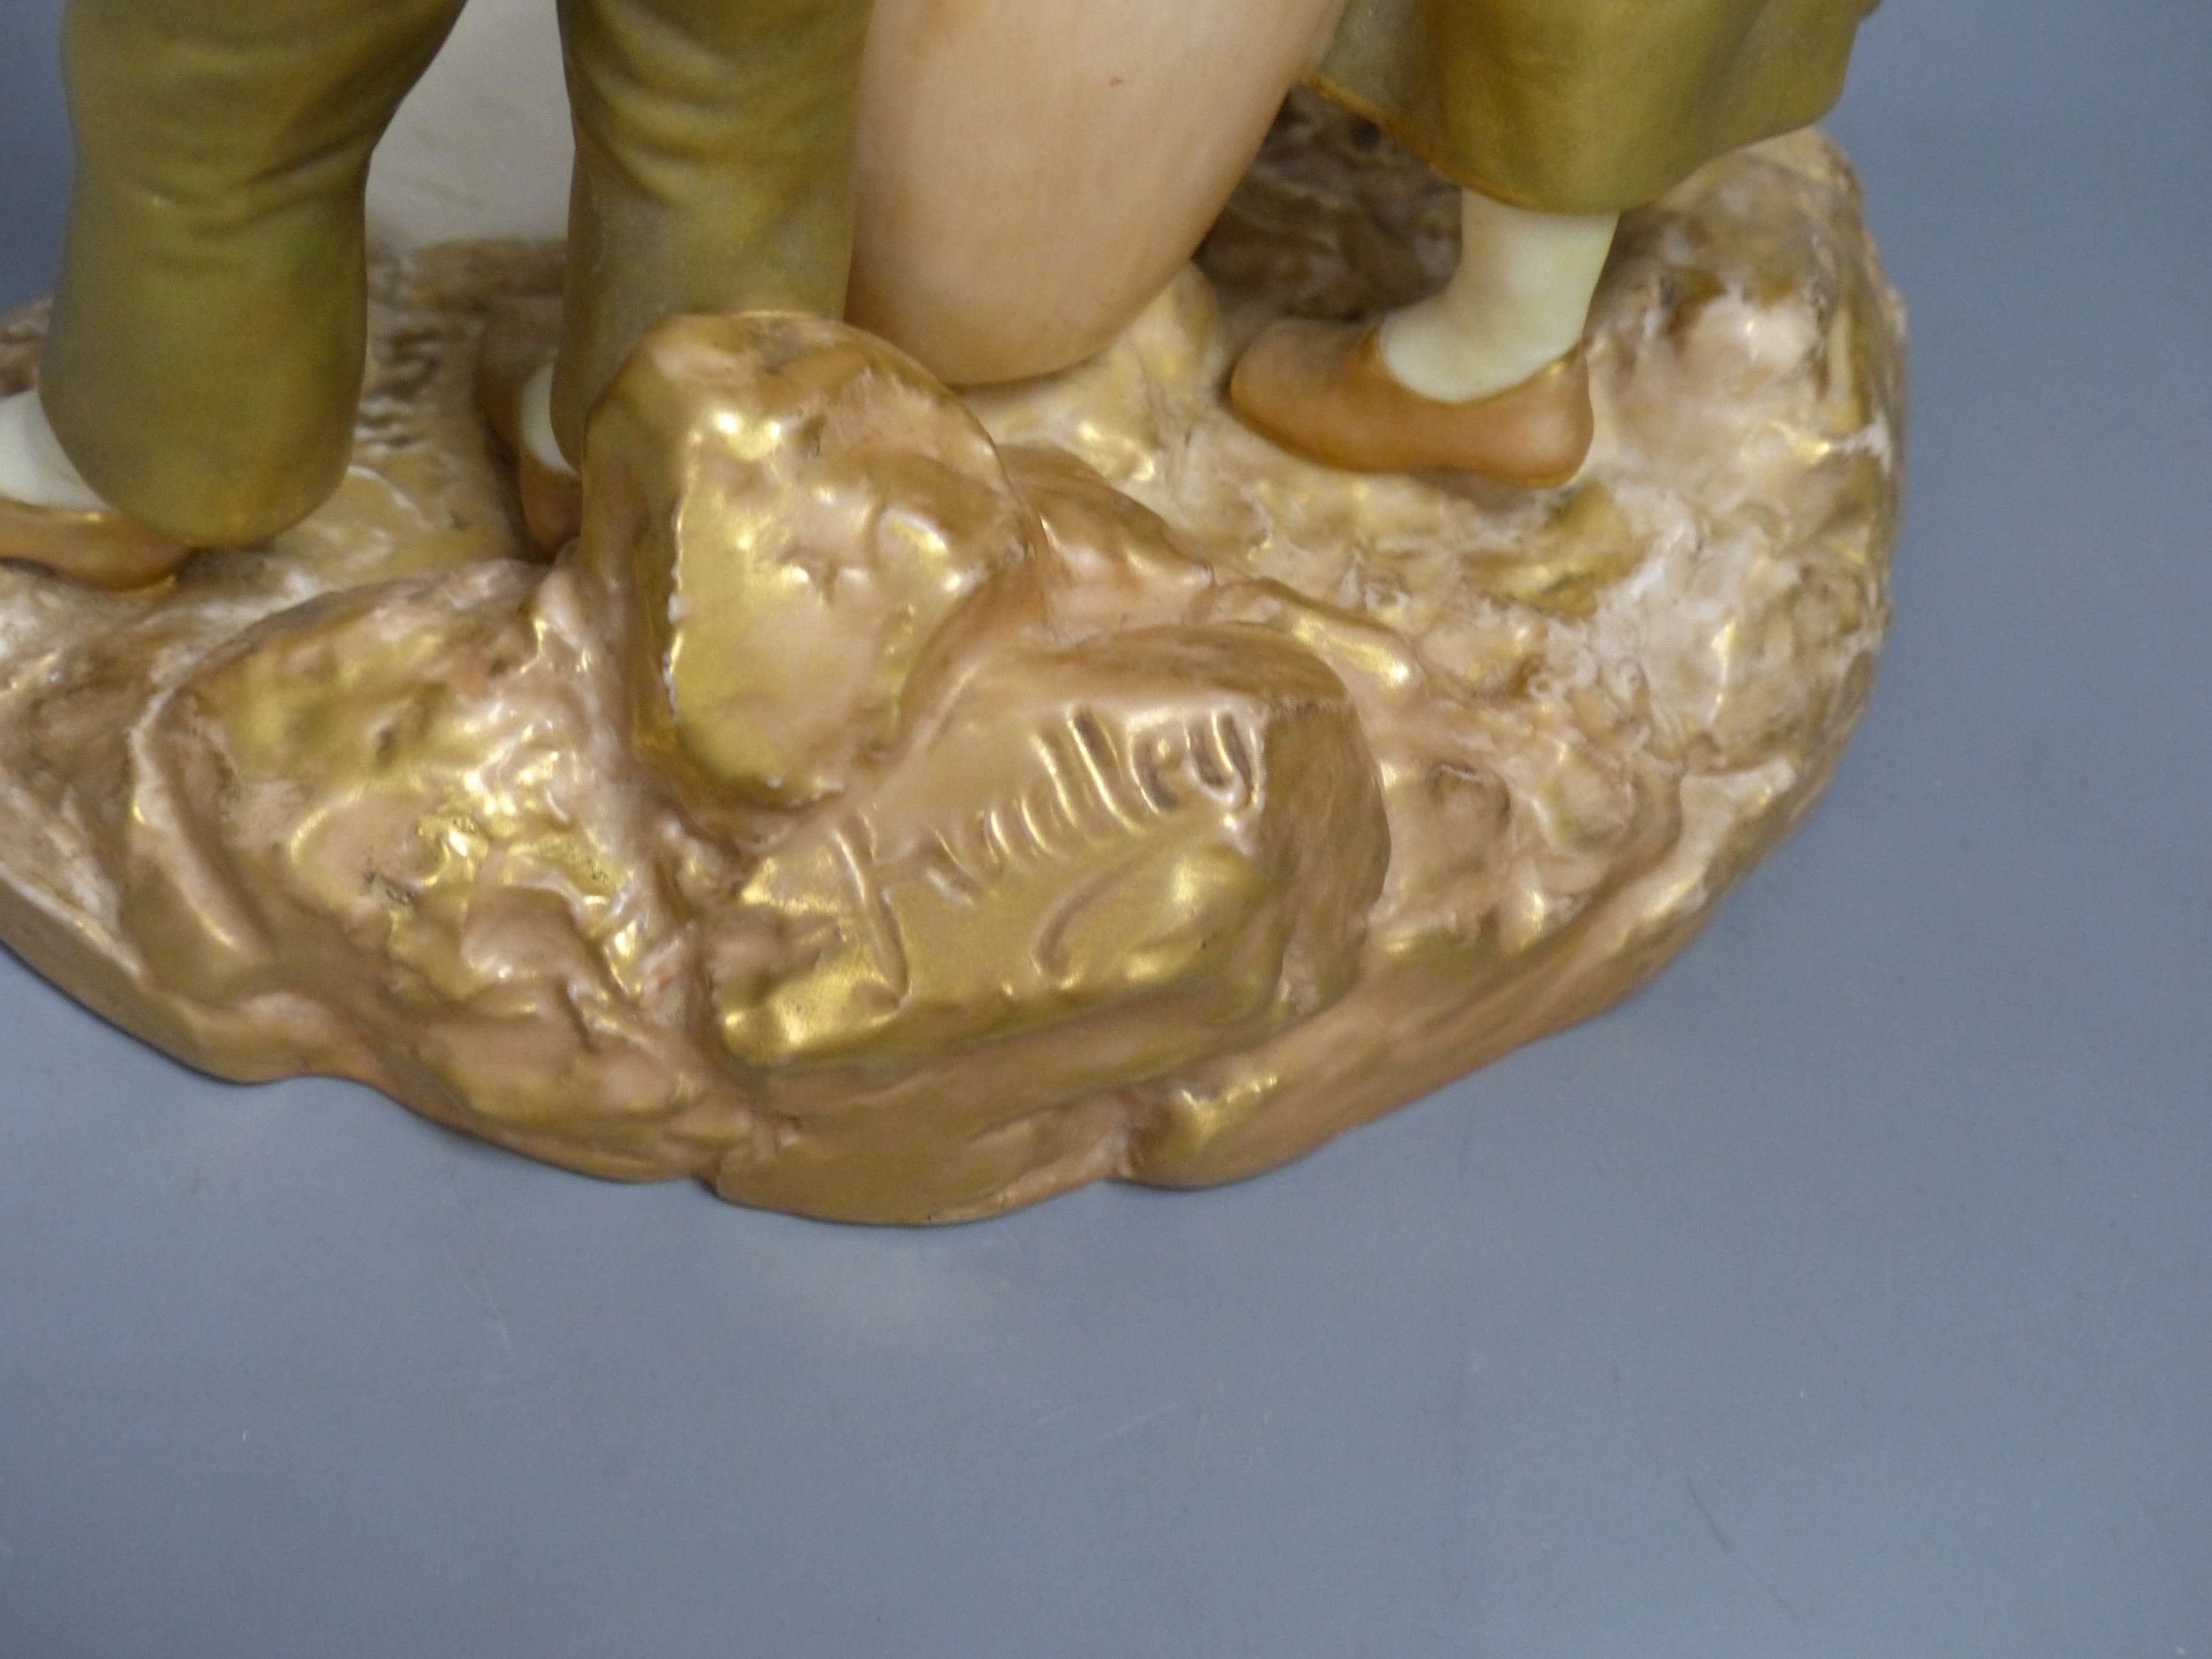 A Royal Worcester group of a boy and a girl, date code for 1917, height 24cm